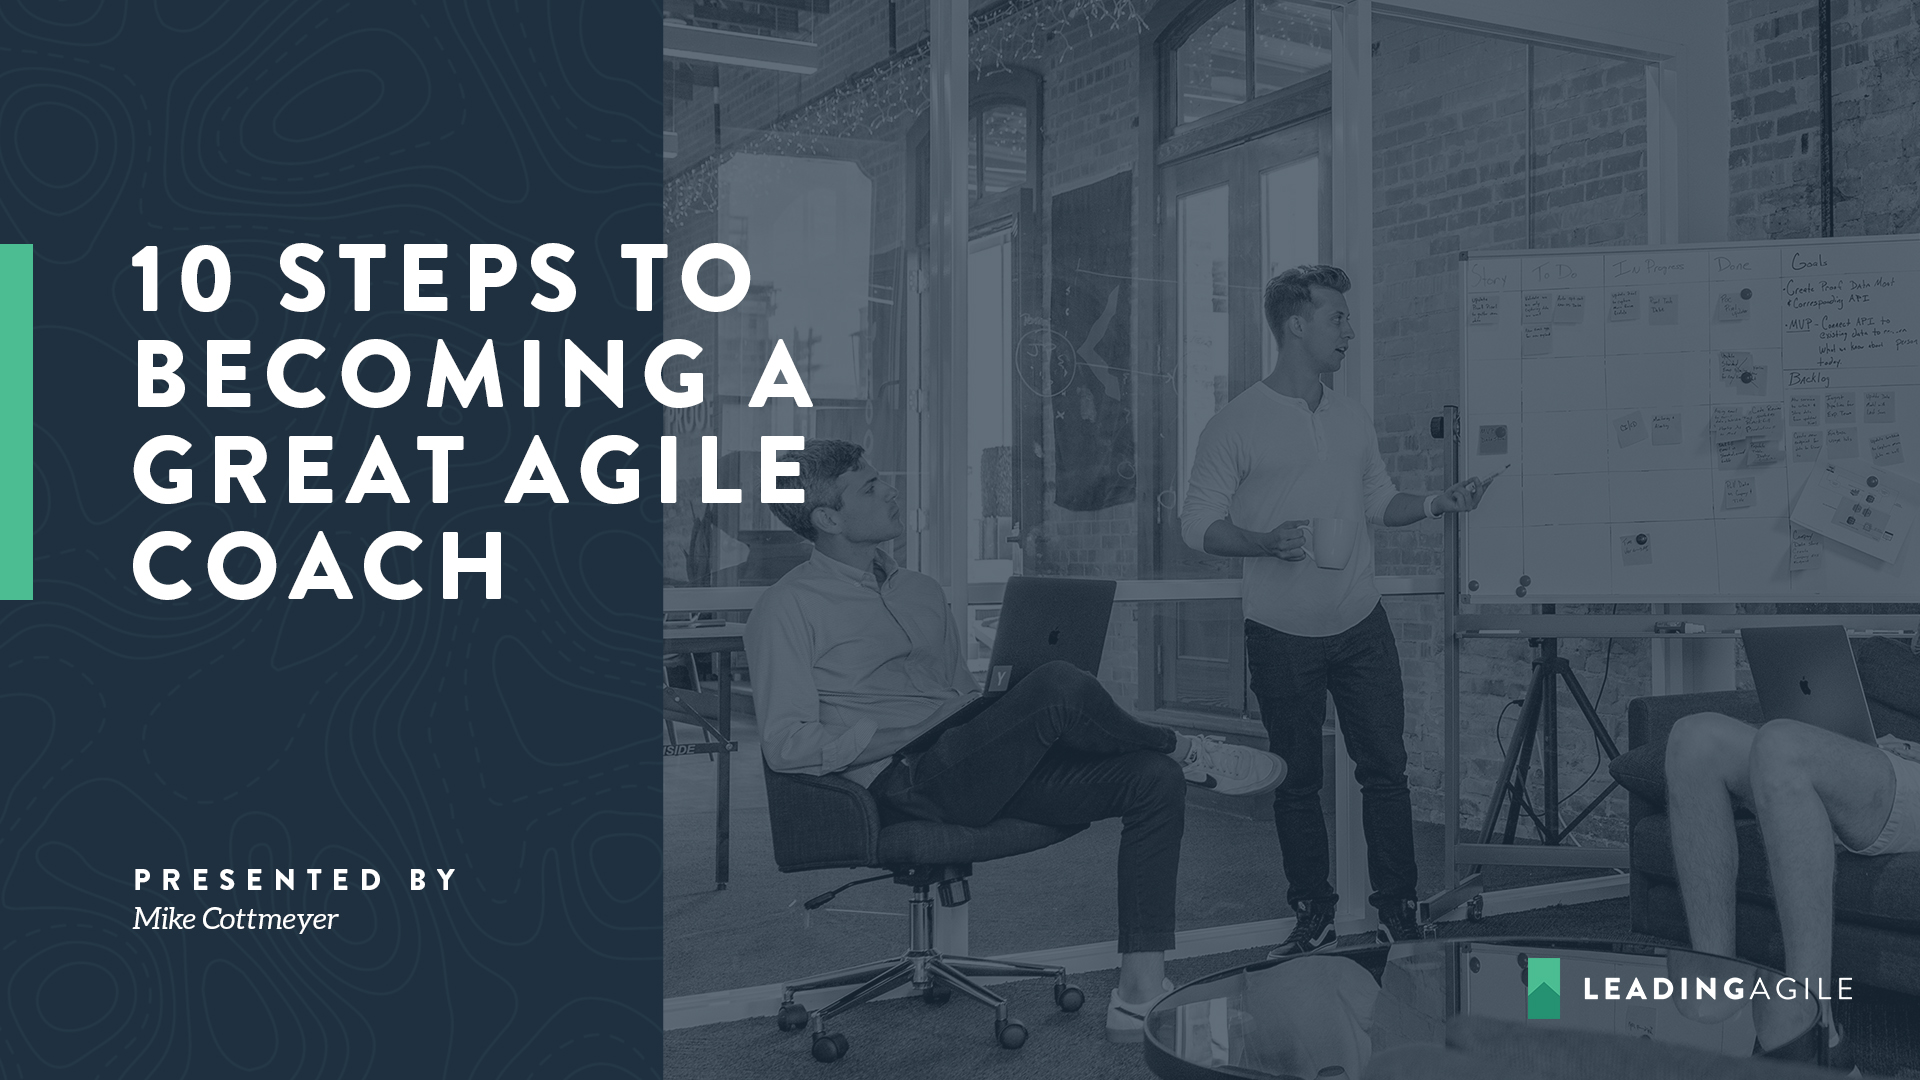 10 Steps to Becoming a Great Agile Coach